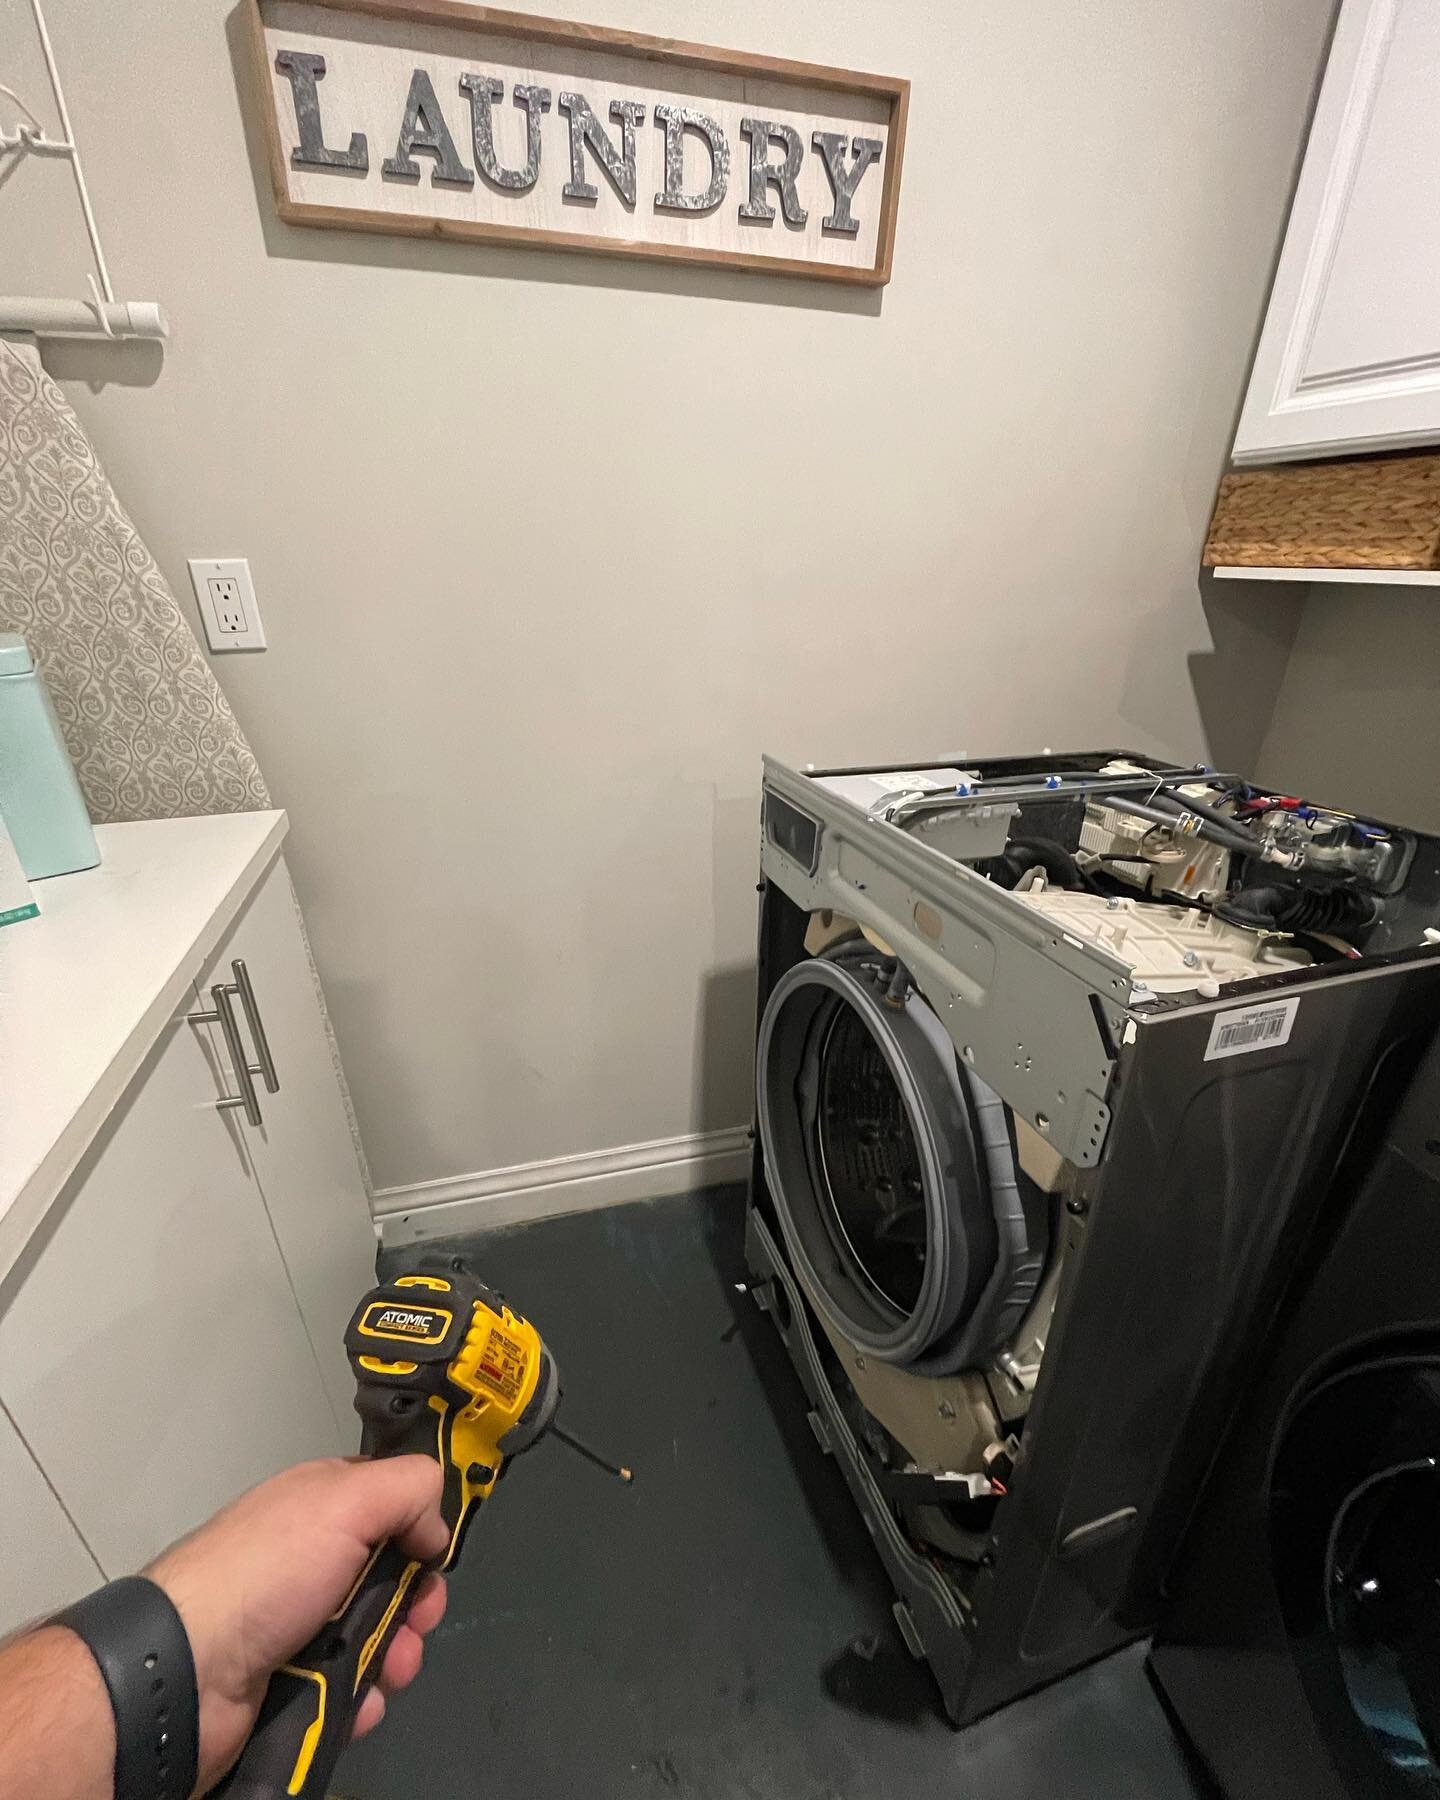 If your washer is leaking, we can fix it, fast and reliable